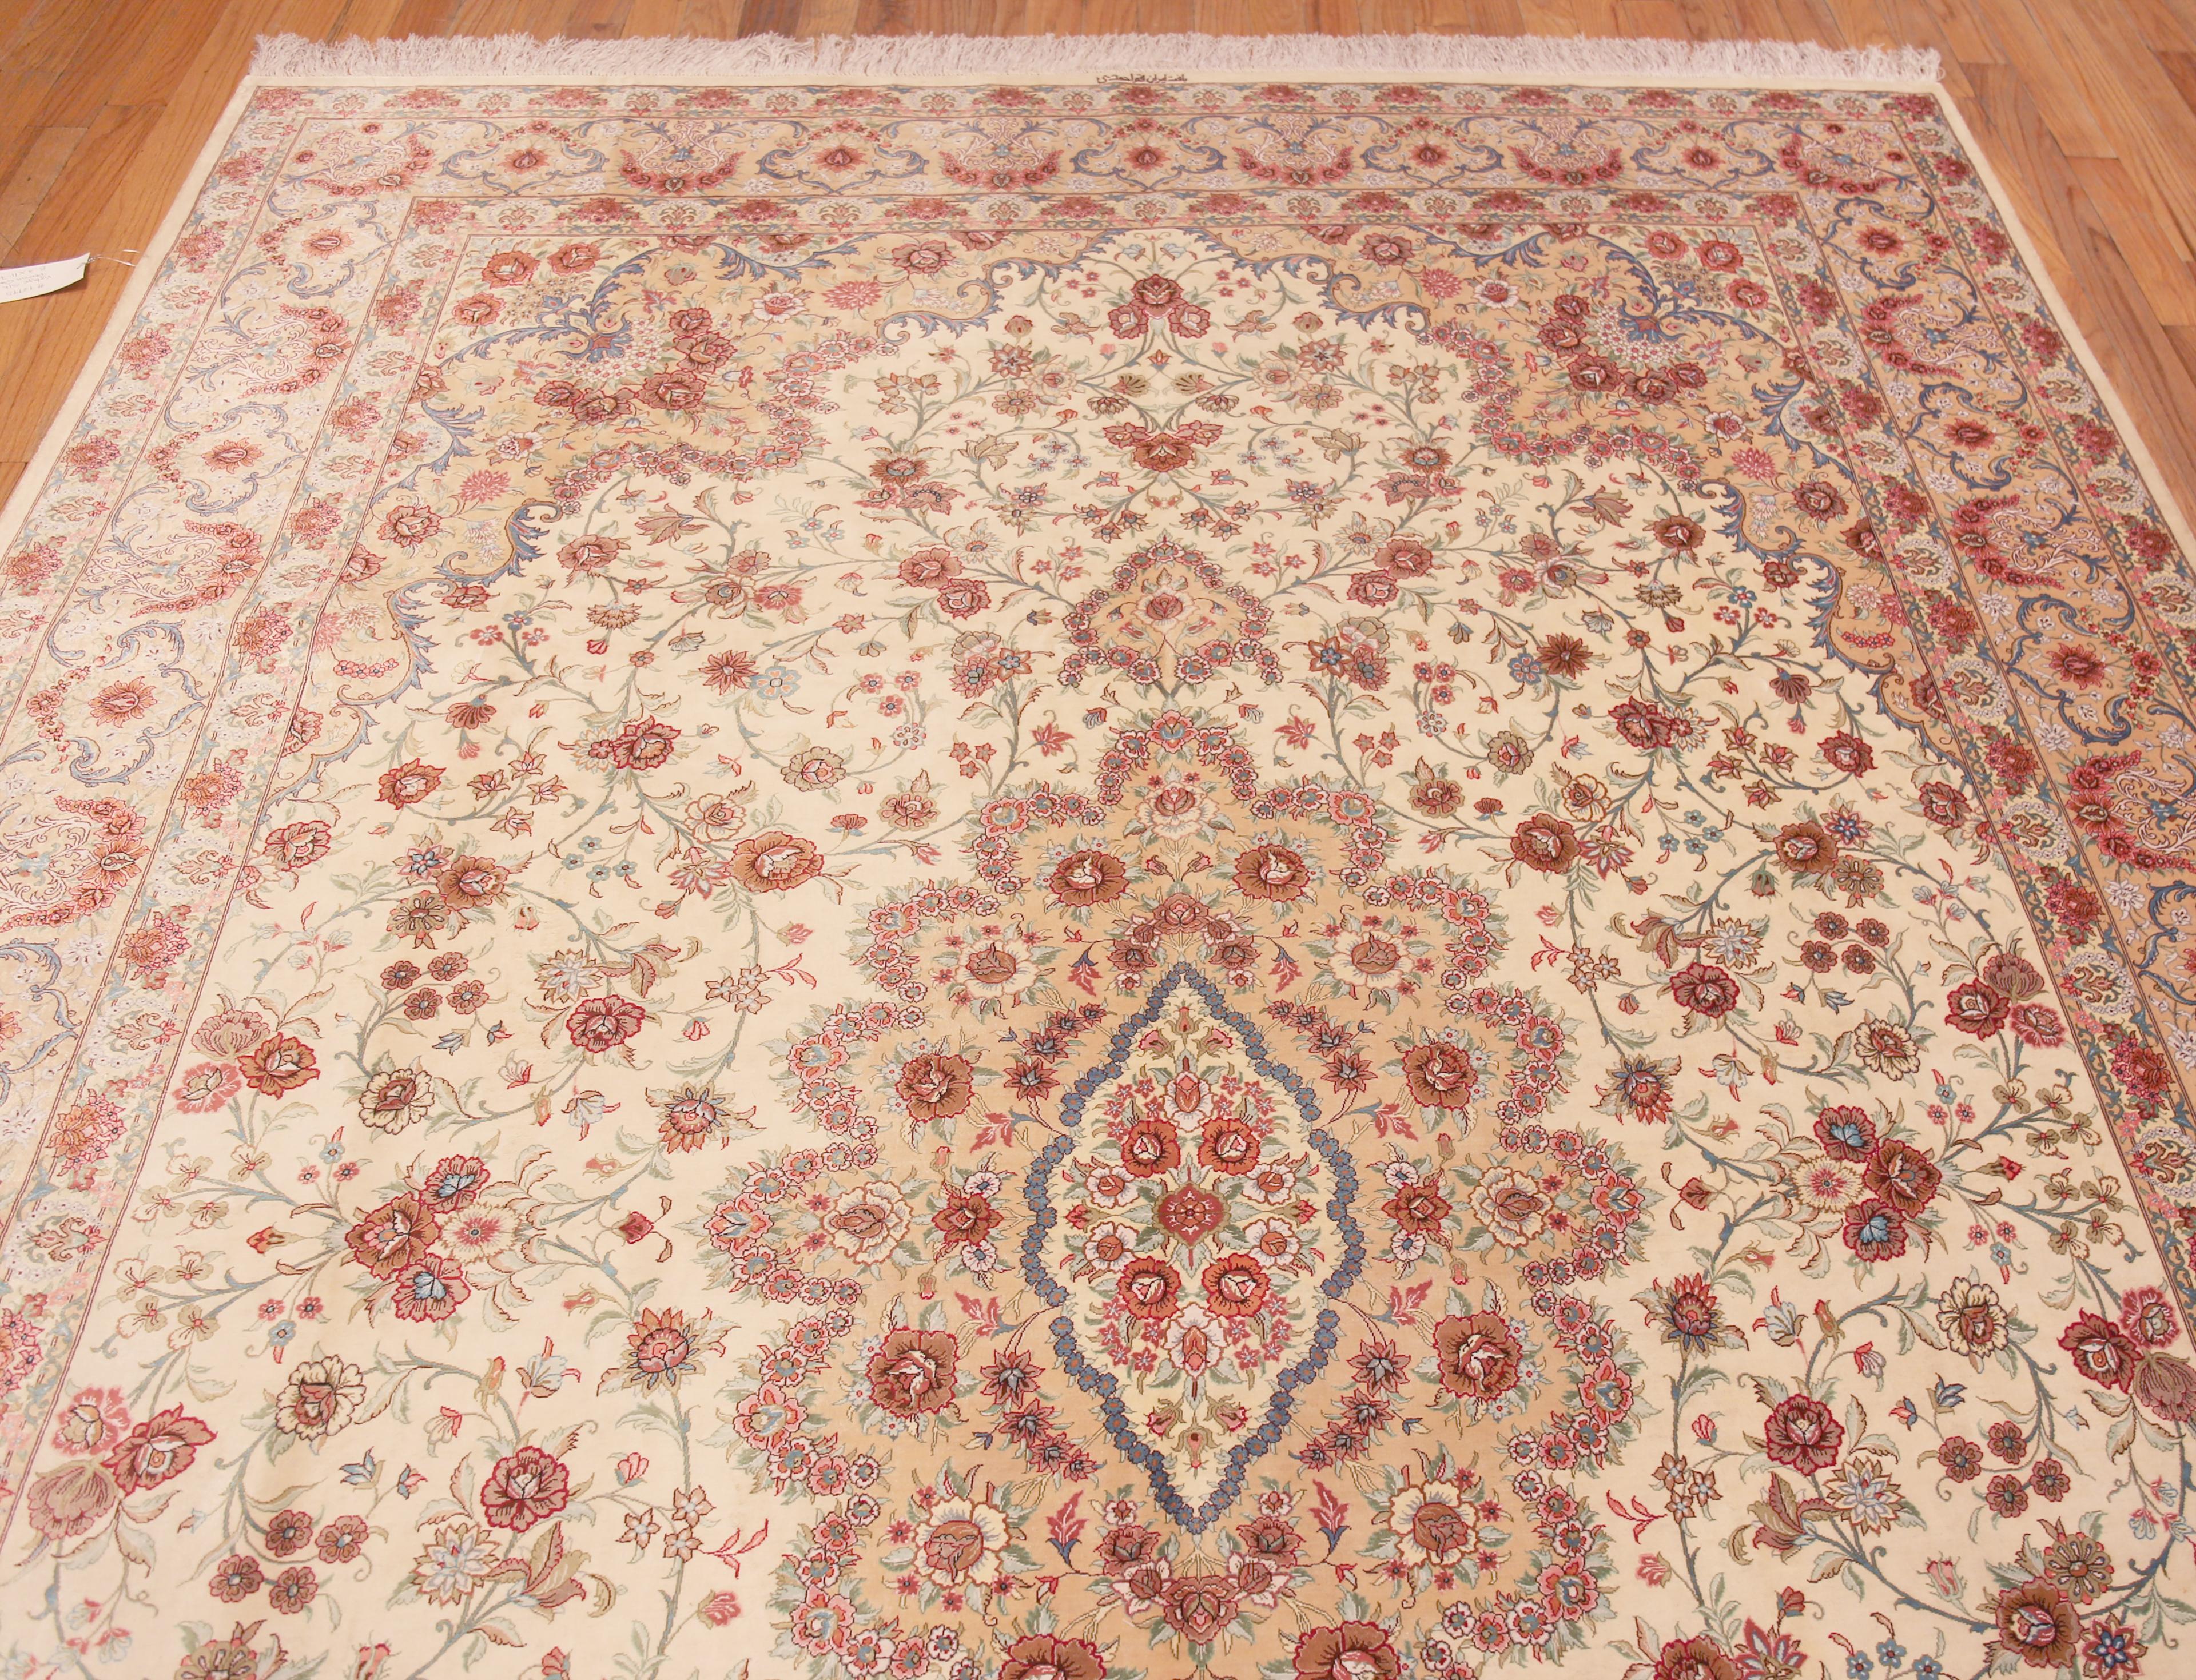 Gorgeous Fine Luxurious Floral Room Size Vintage Persian Silk Qum Rug, country of origin: Persian Rugs, Circa date: Vintage 